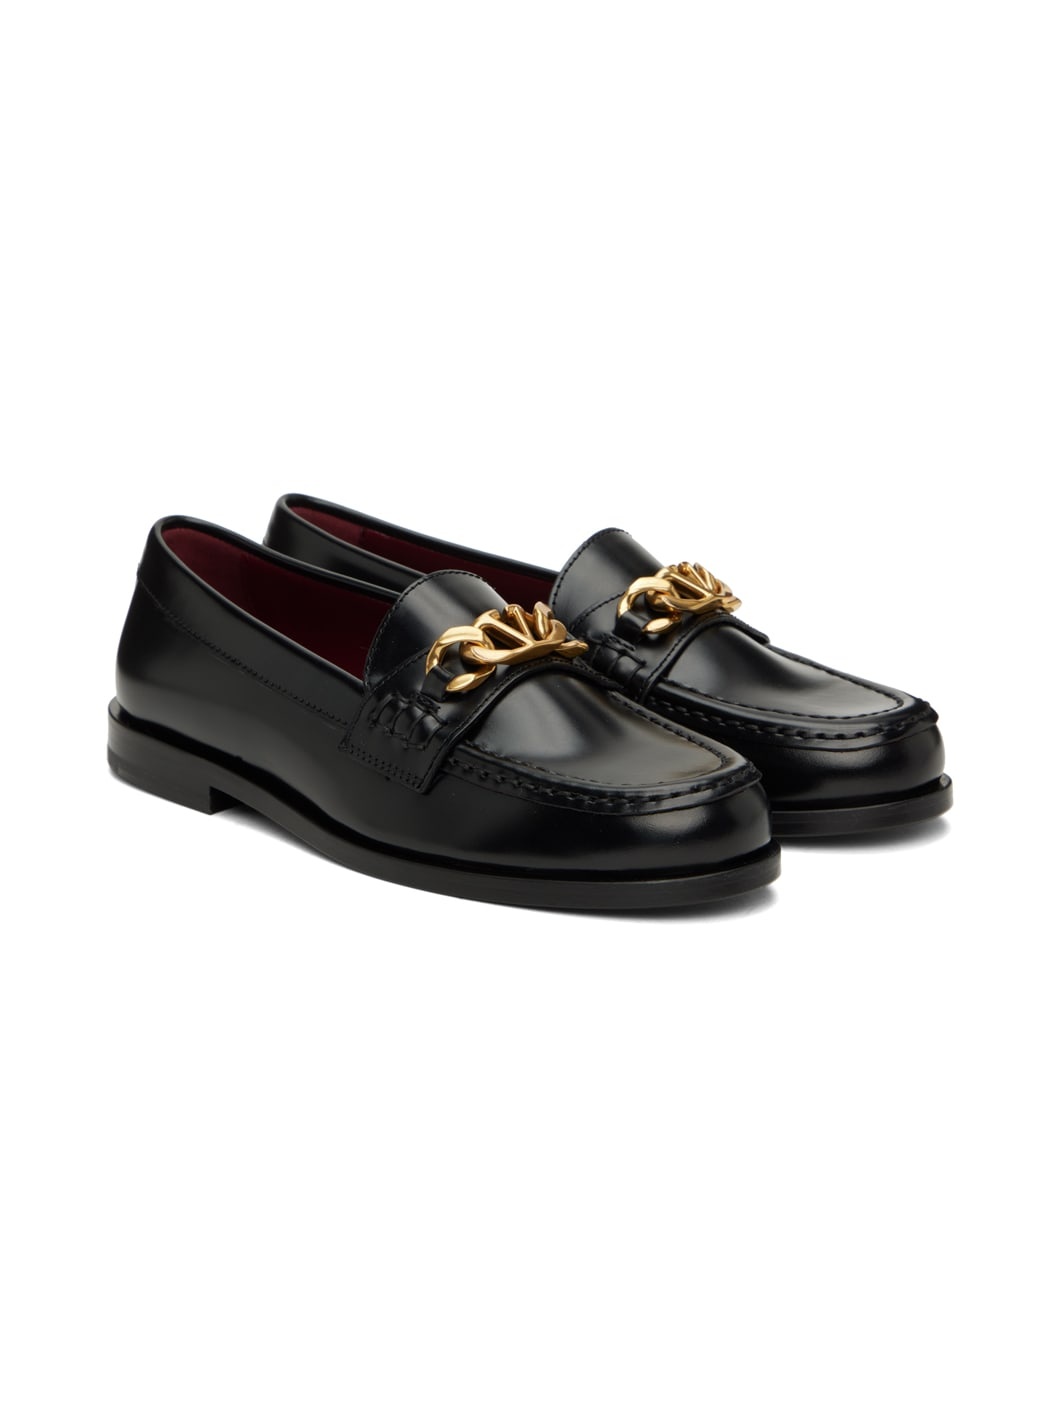 Black VLogo Chain Loafers - 4